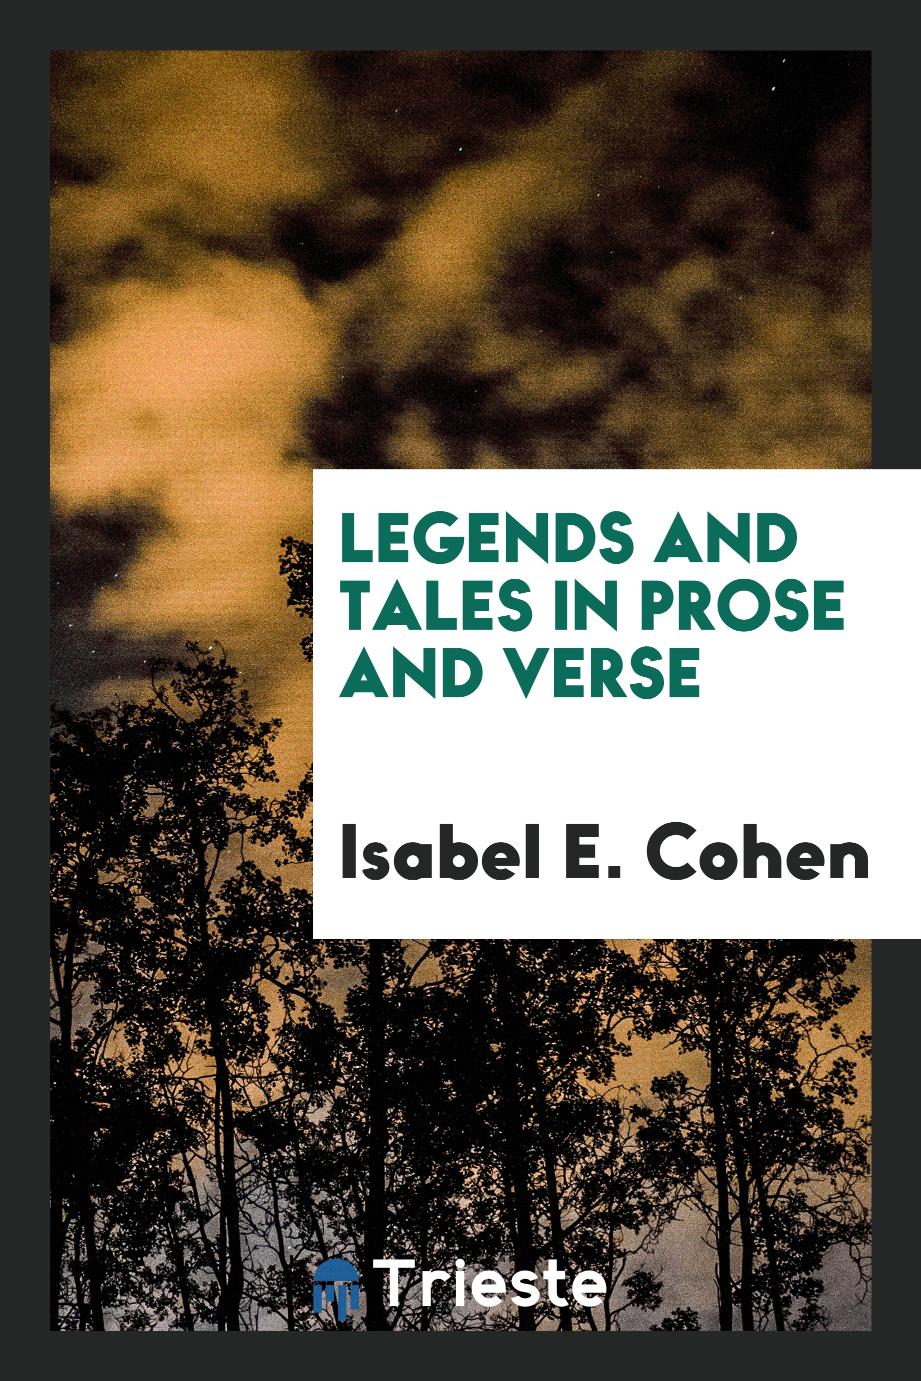 Legends and tales in prose and verse